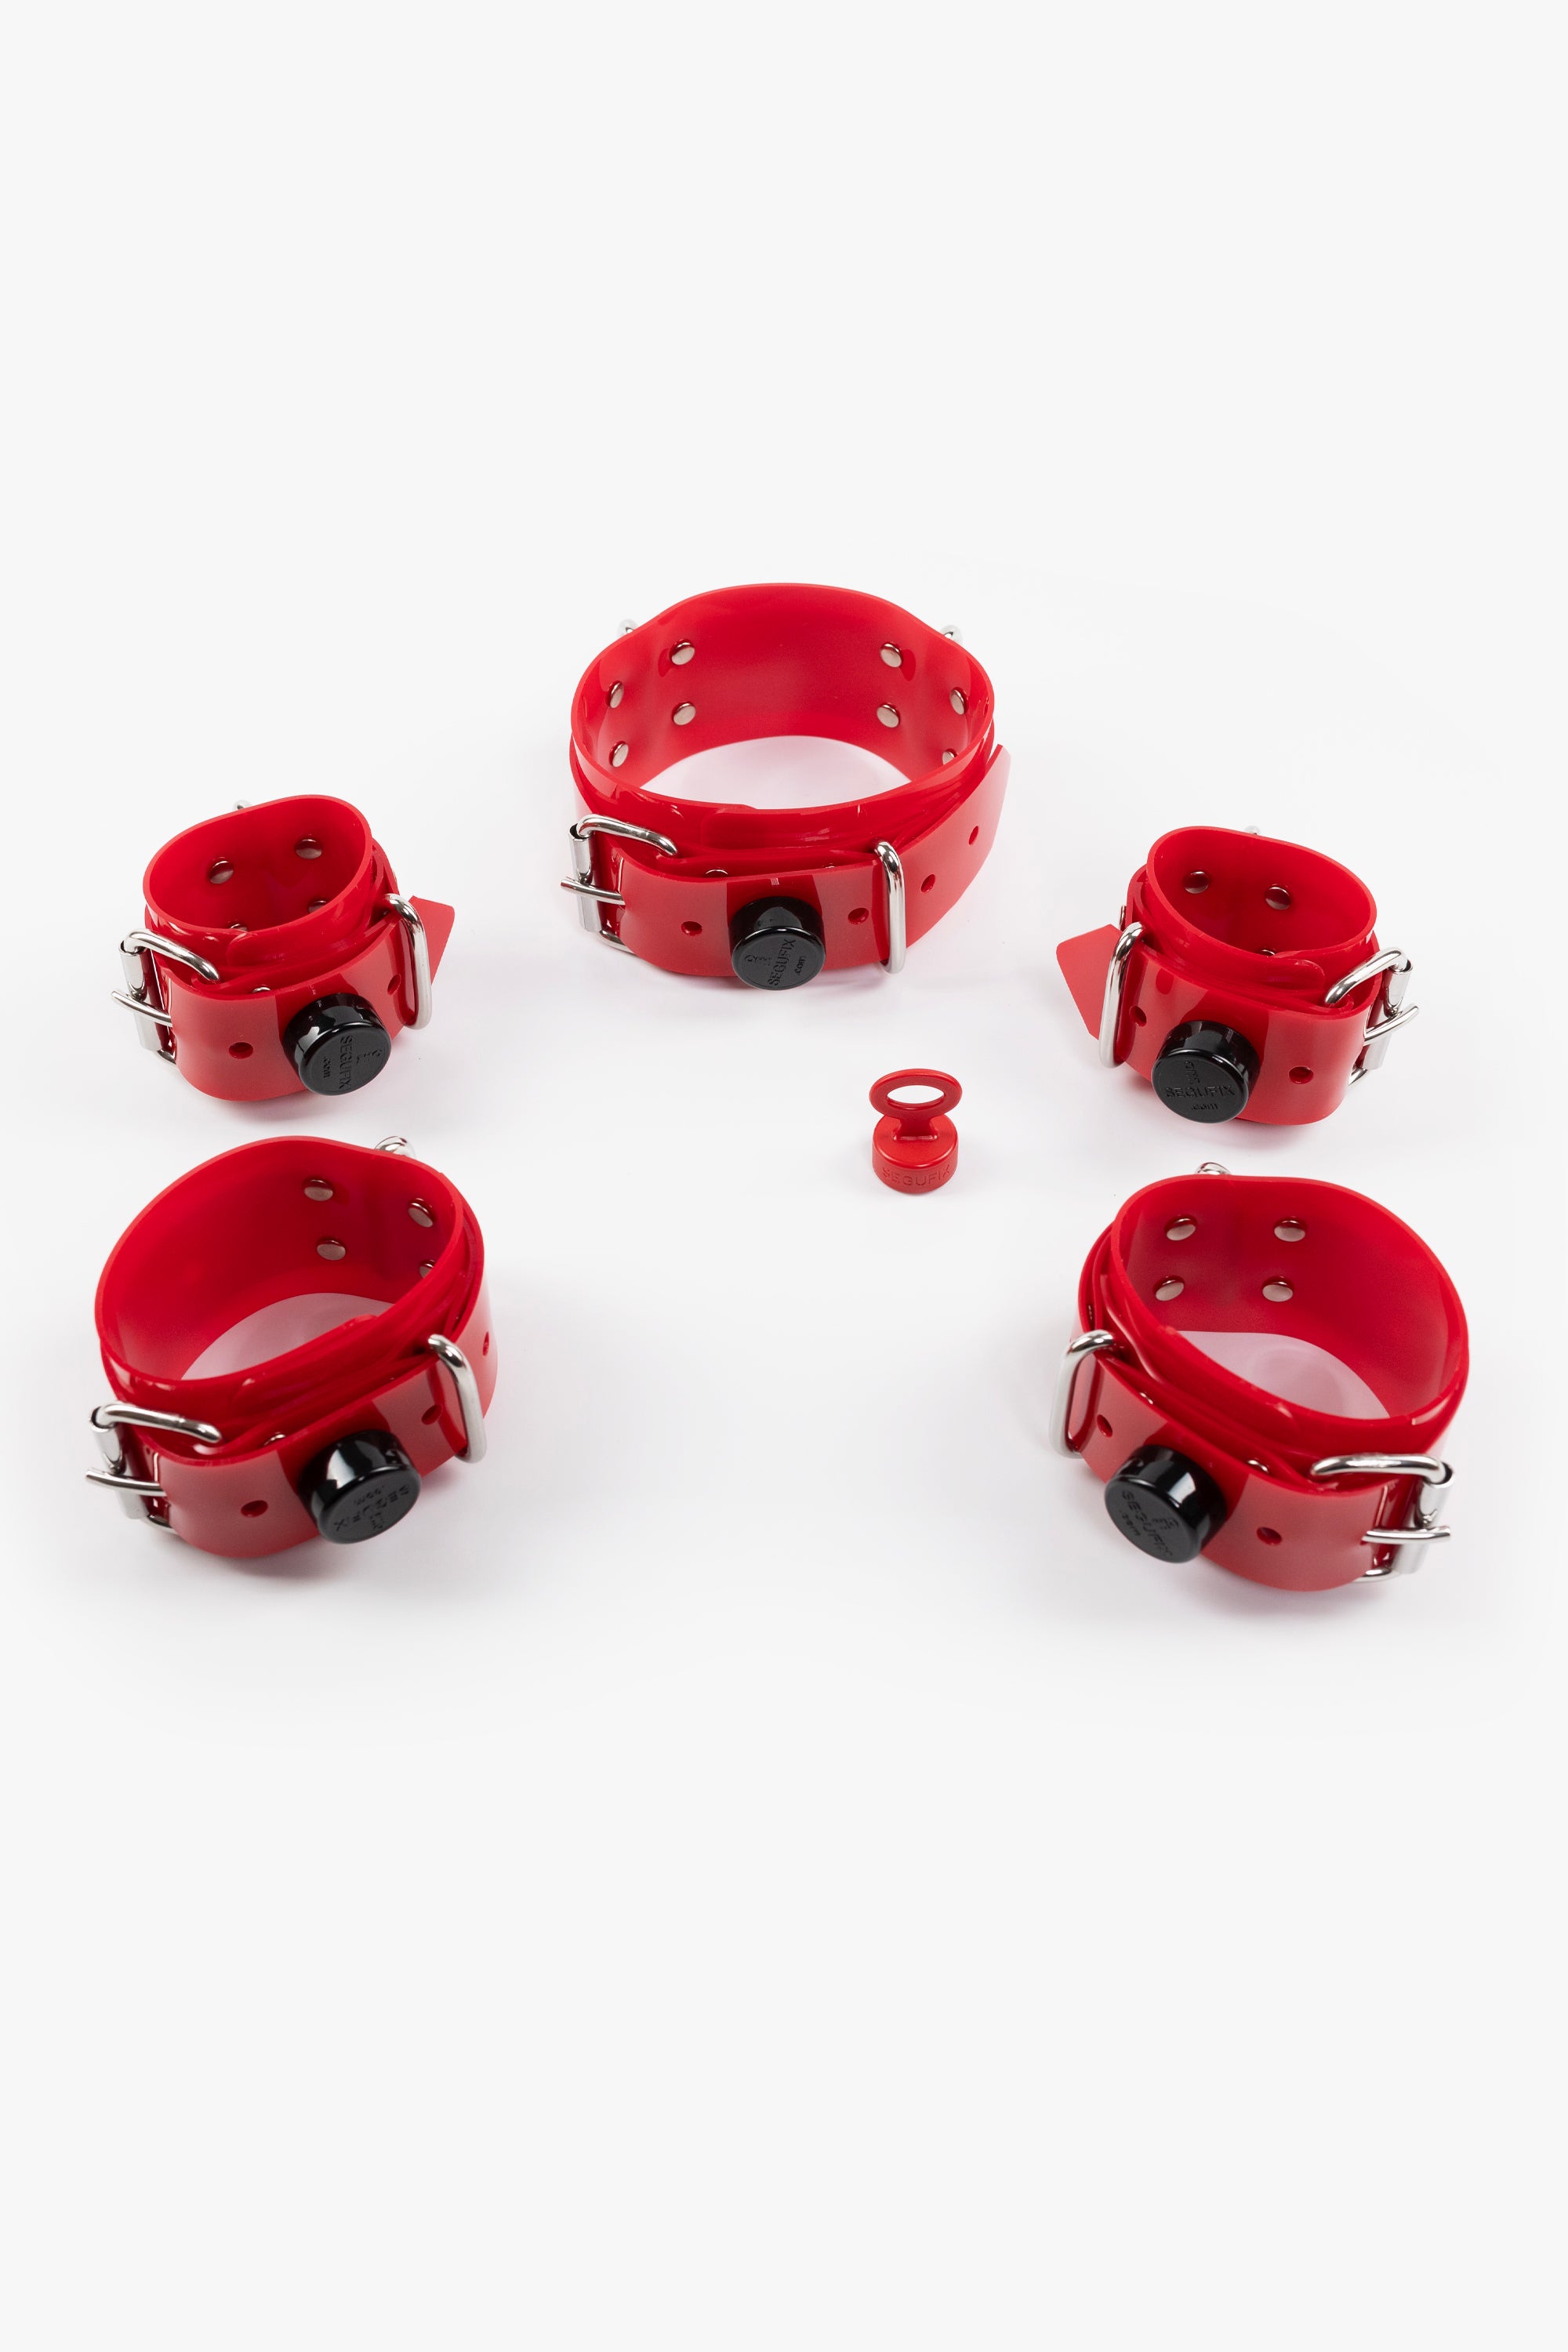 Lockable segufix collar and wrist, ankle cuffs set, red/chrome